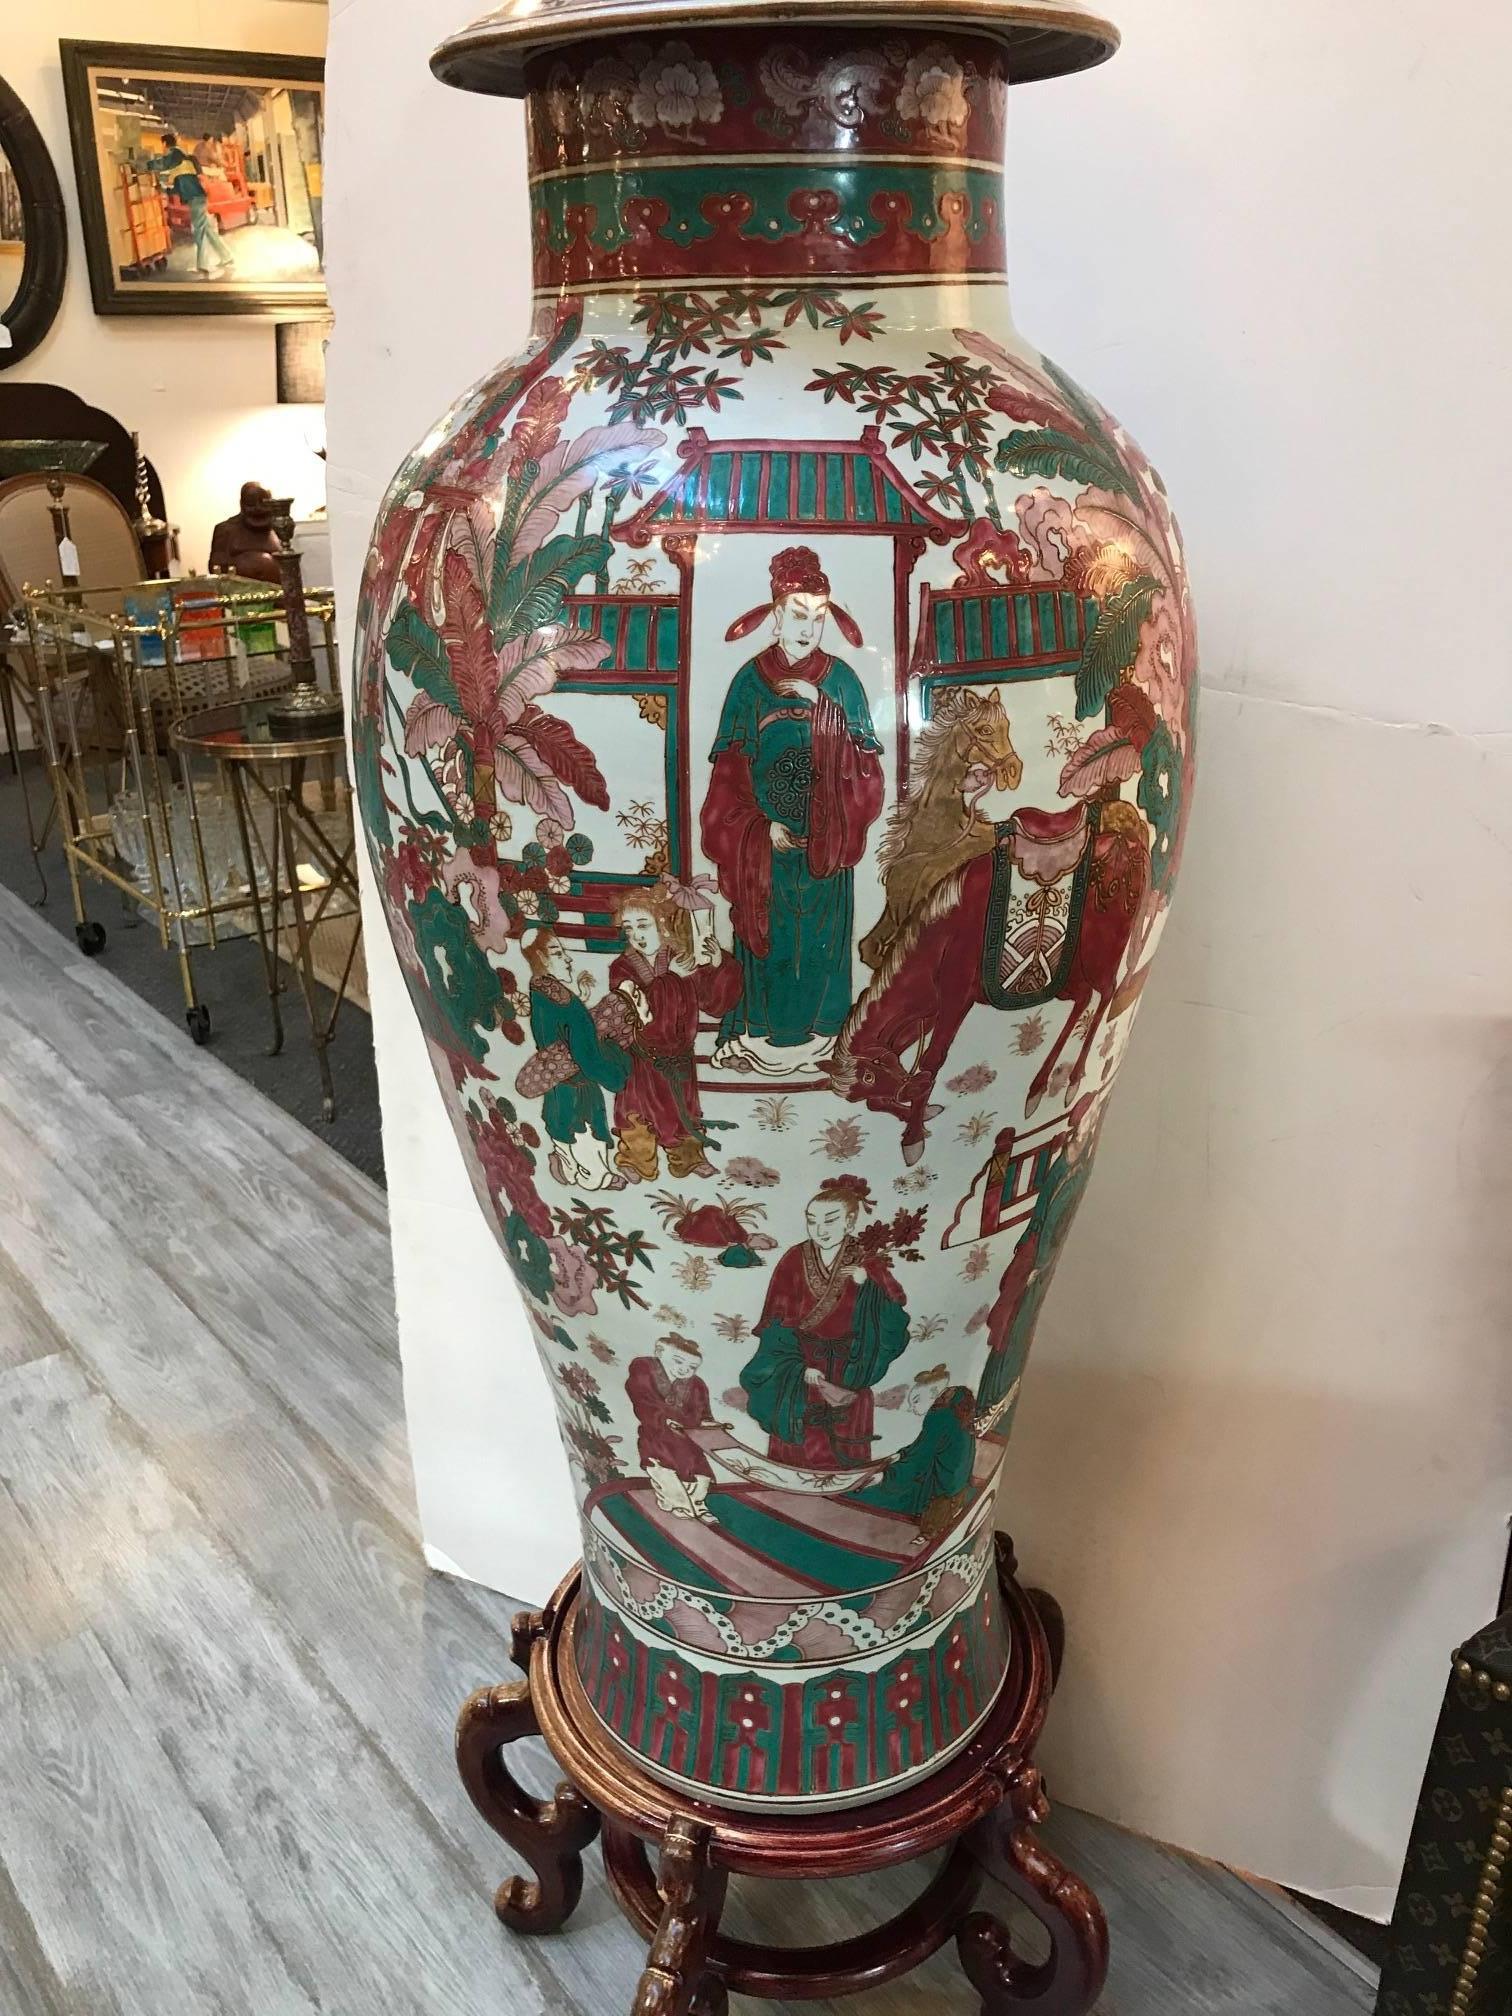 A large hand-painted Chinese porcelain palace vase on Stand. The off-white background with hand-painted Chinese scenes of people and gardens. The colors pallet is in iron red and jade green. The lave vase comes with the wood base. The height of the